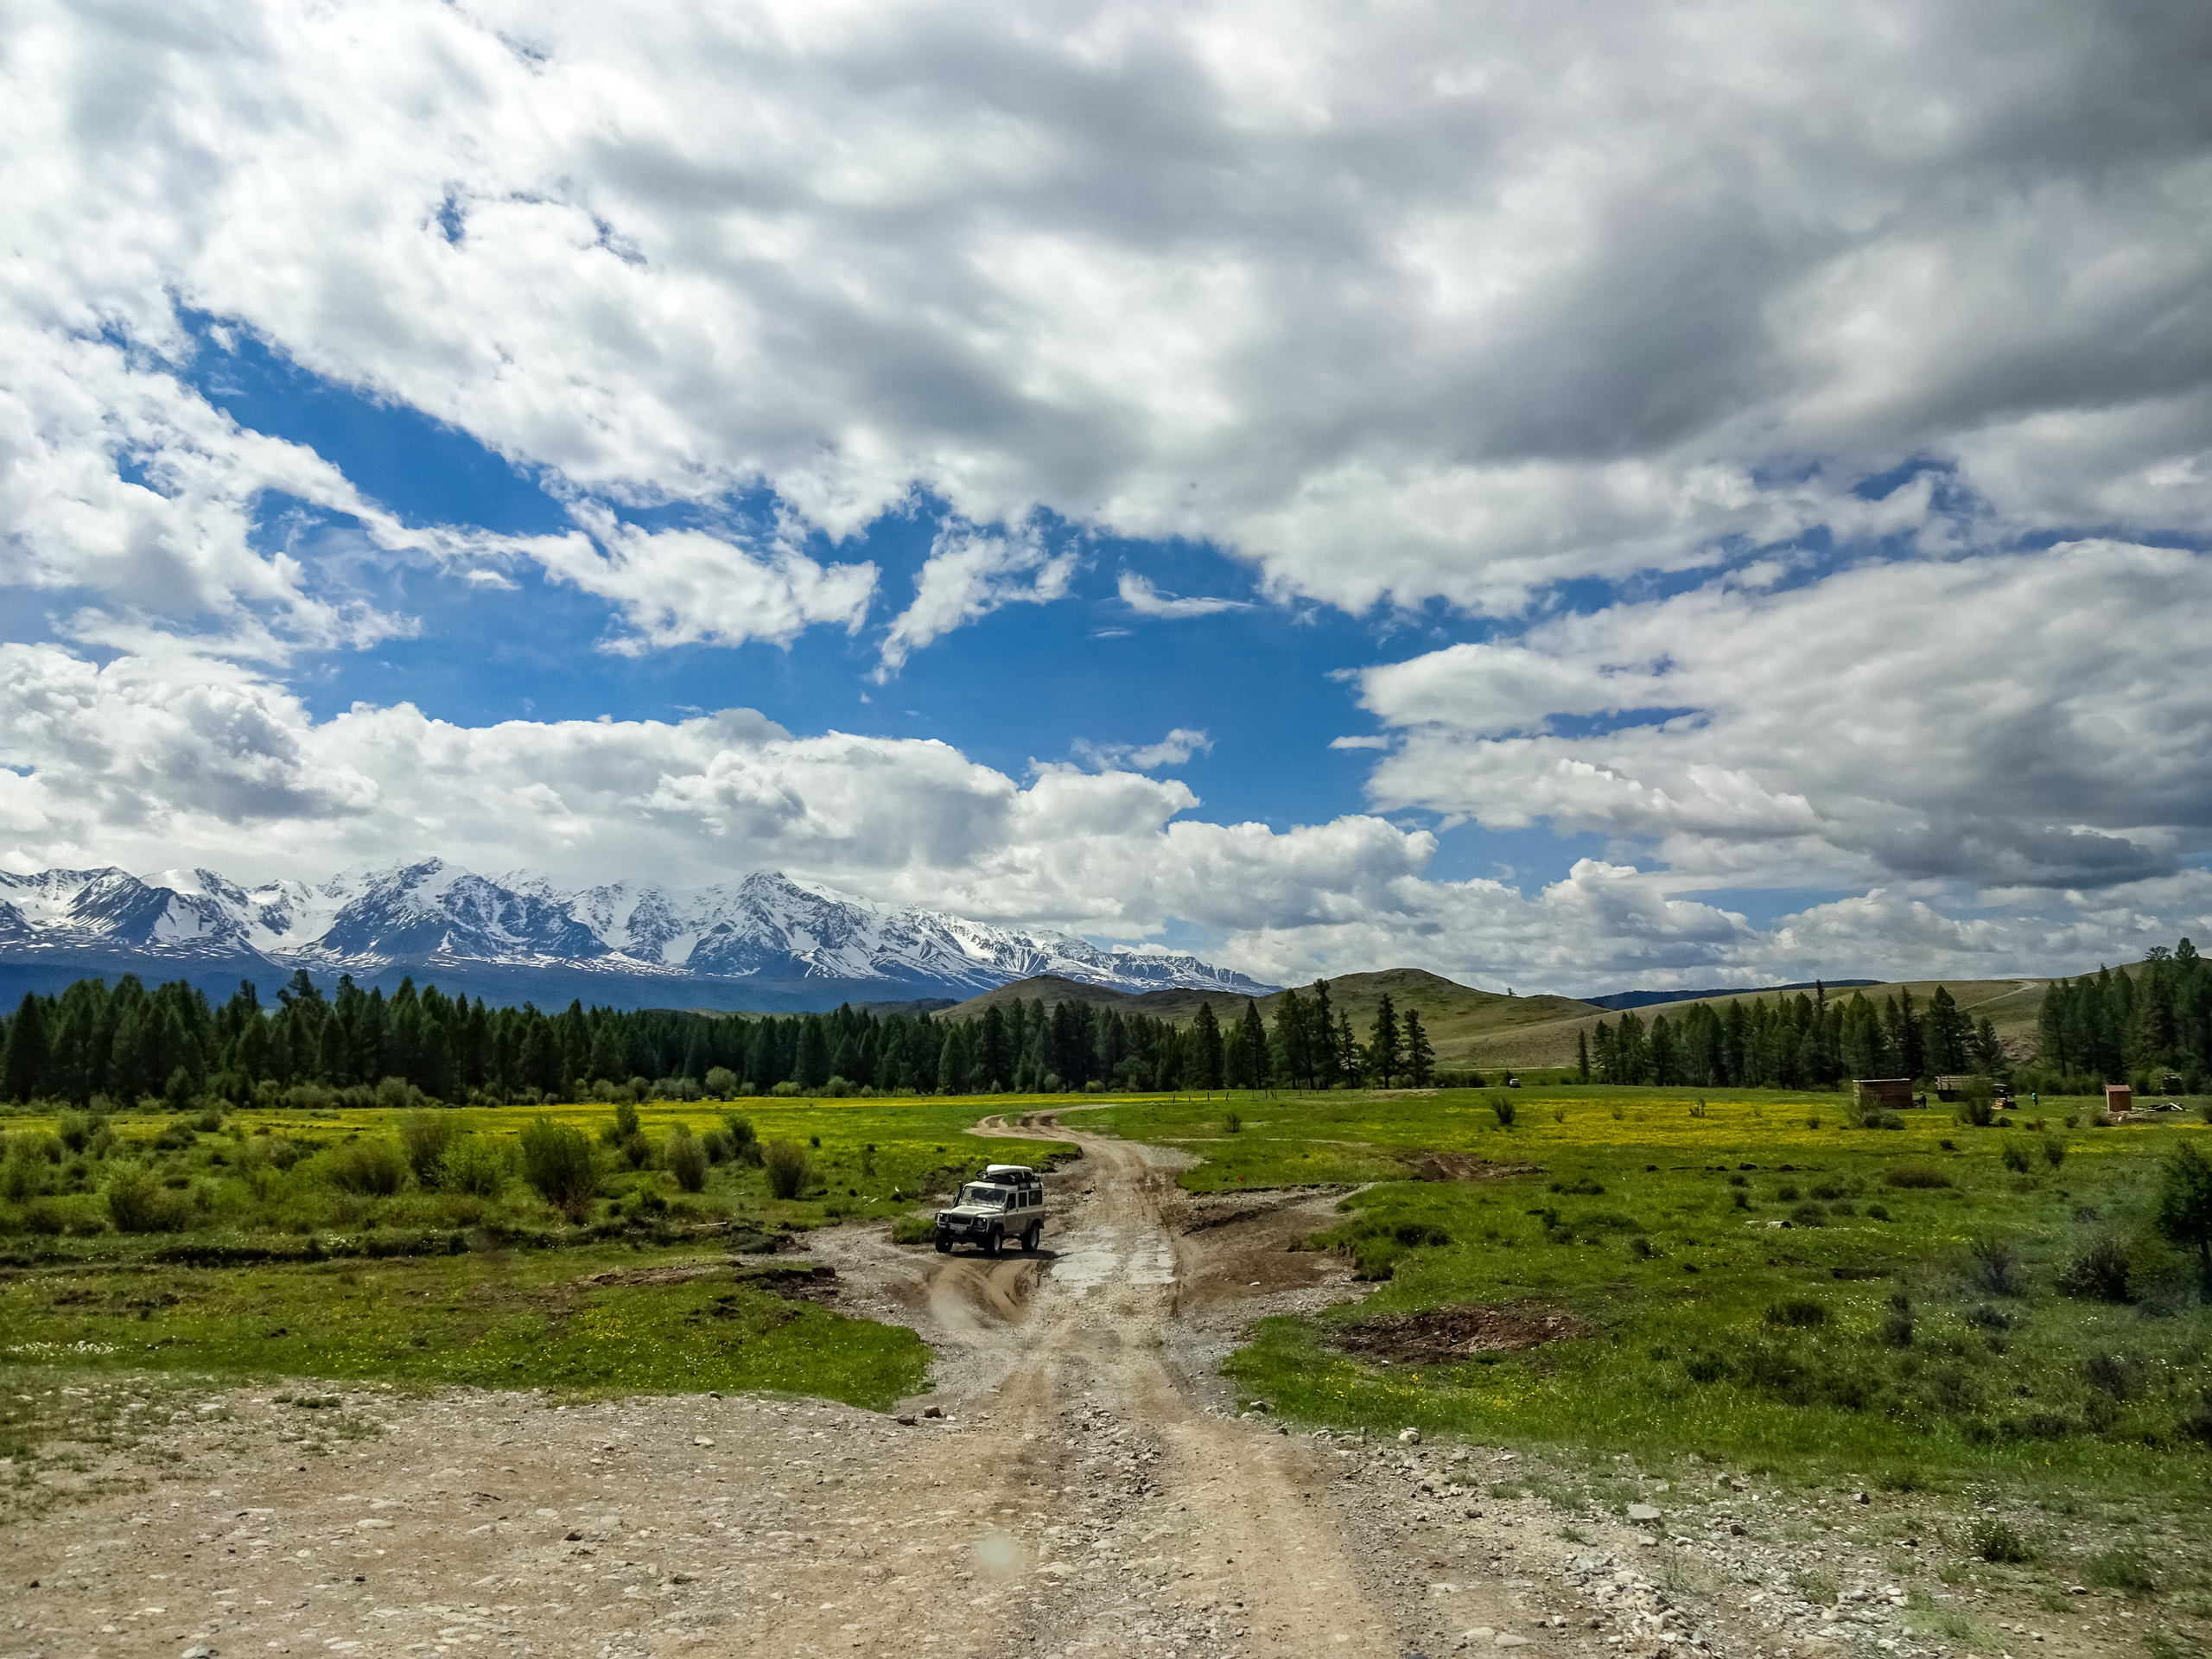 Safari jeep all terain vehicle parked on dirt access road in Altai mountains Russia